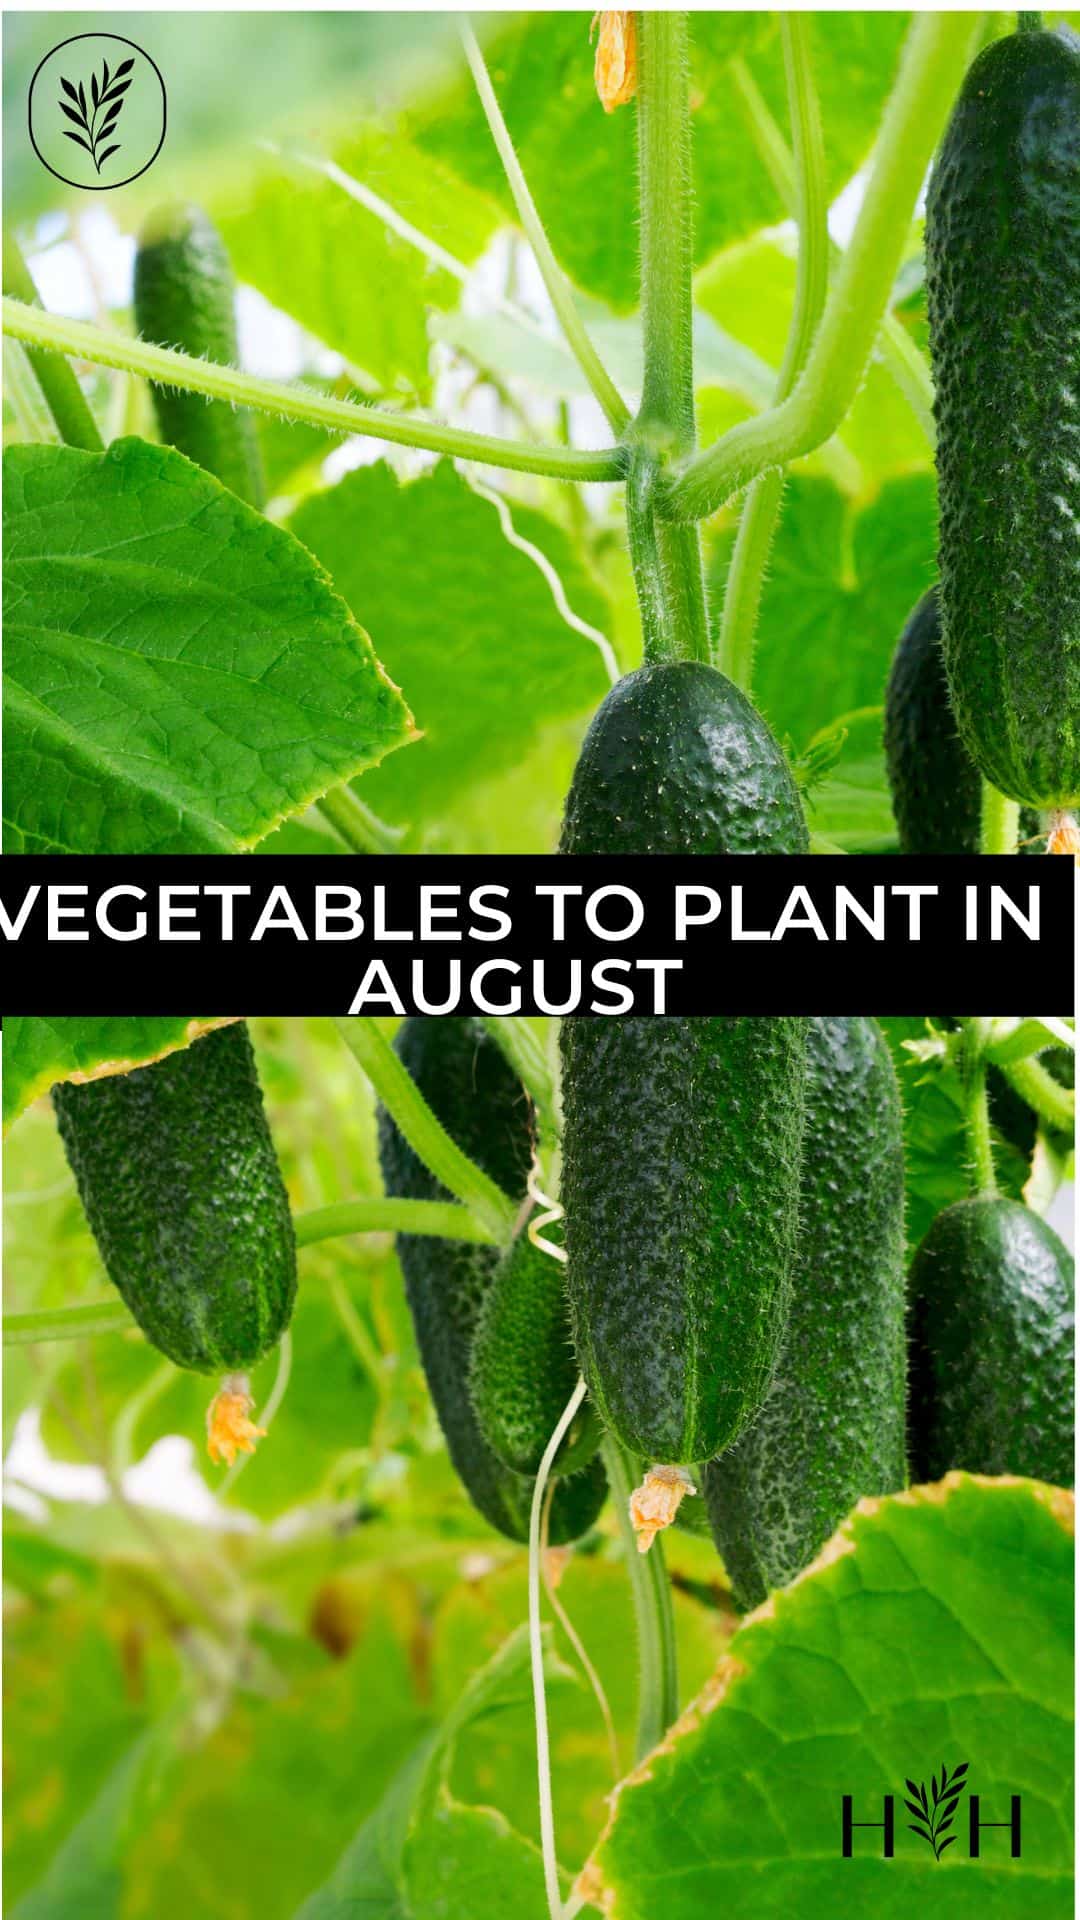 Vegetables to plant in august via @home4theharvest